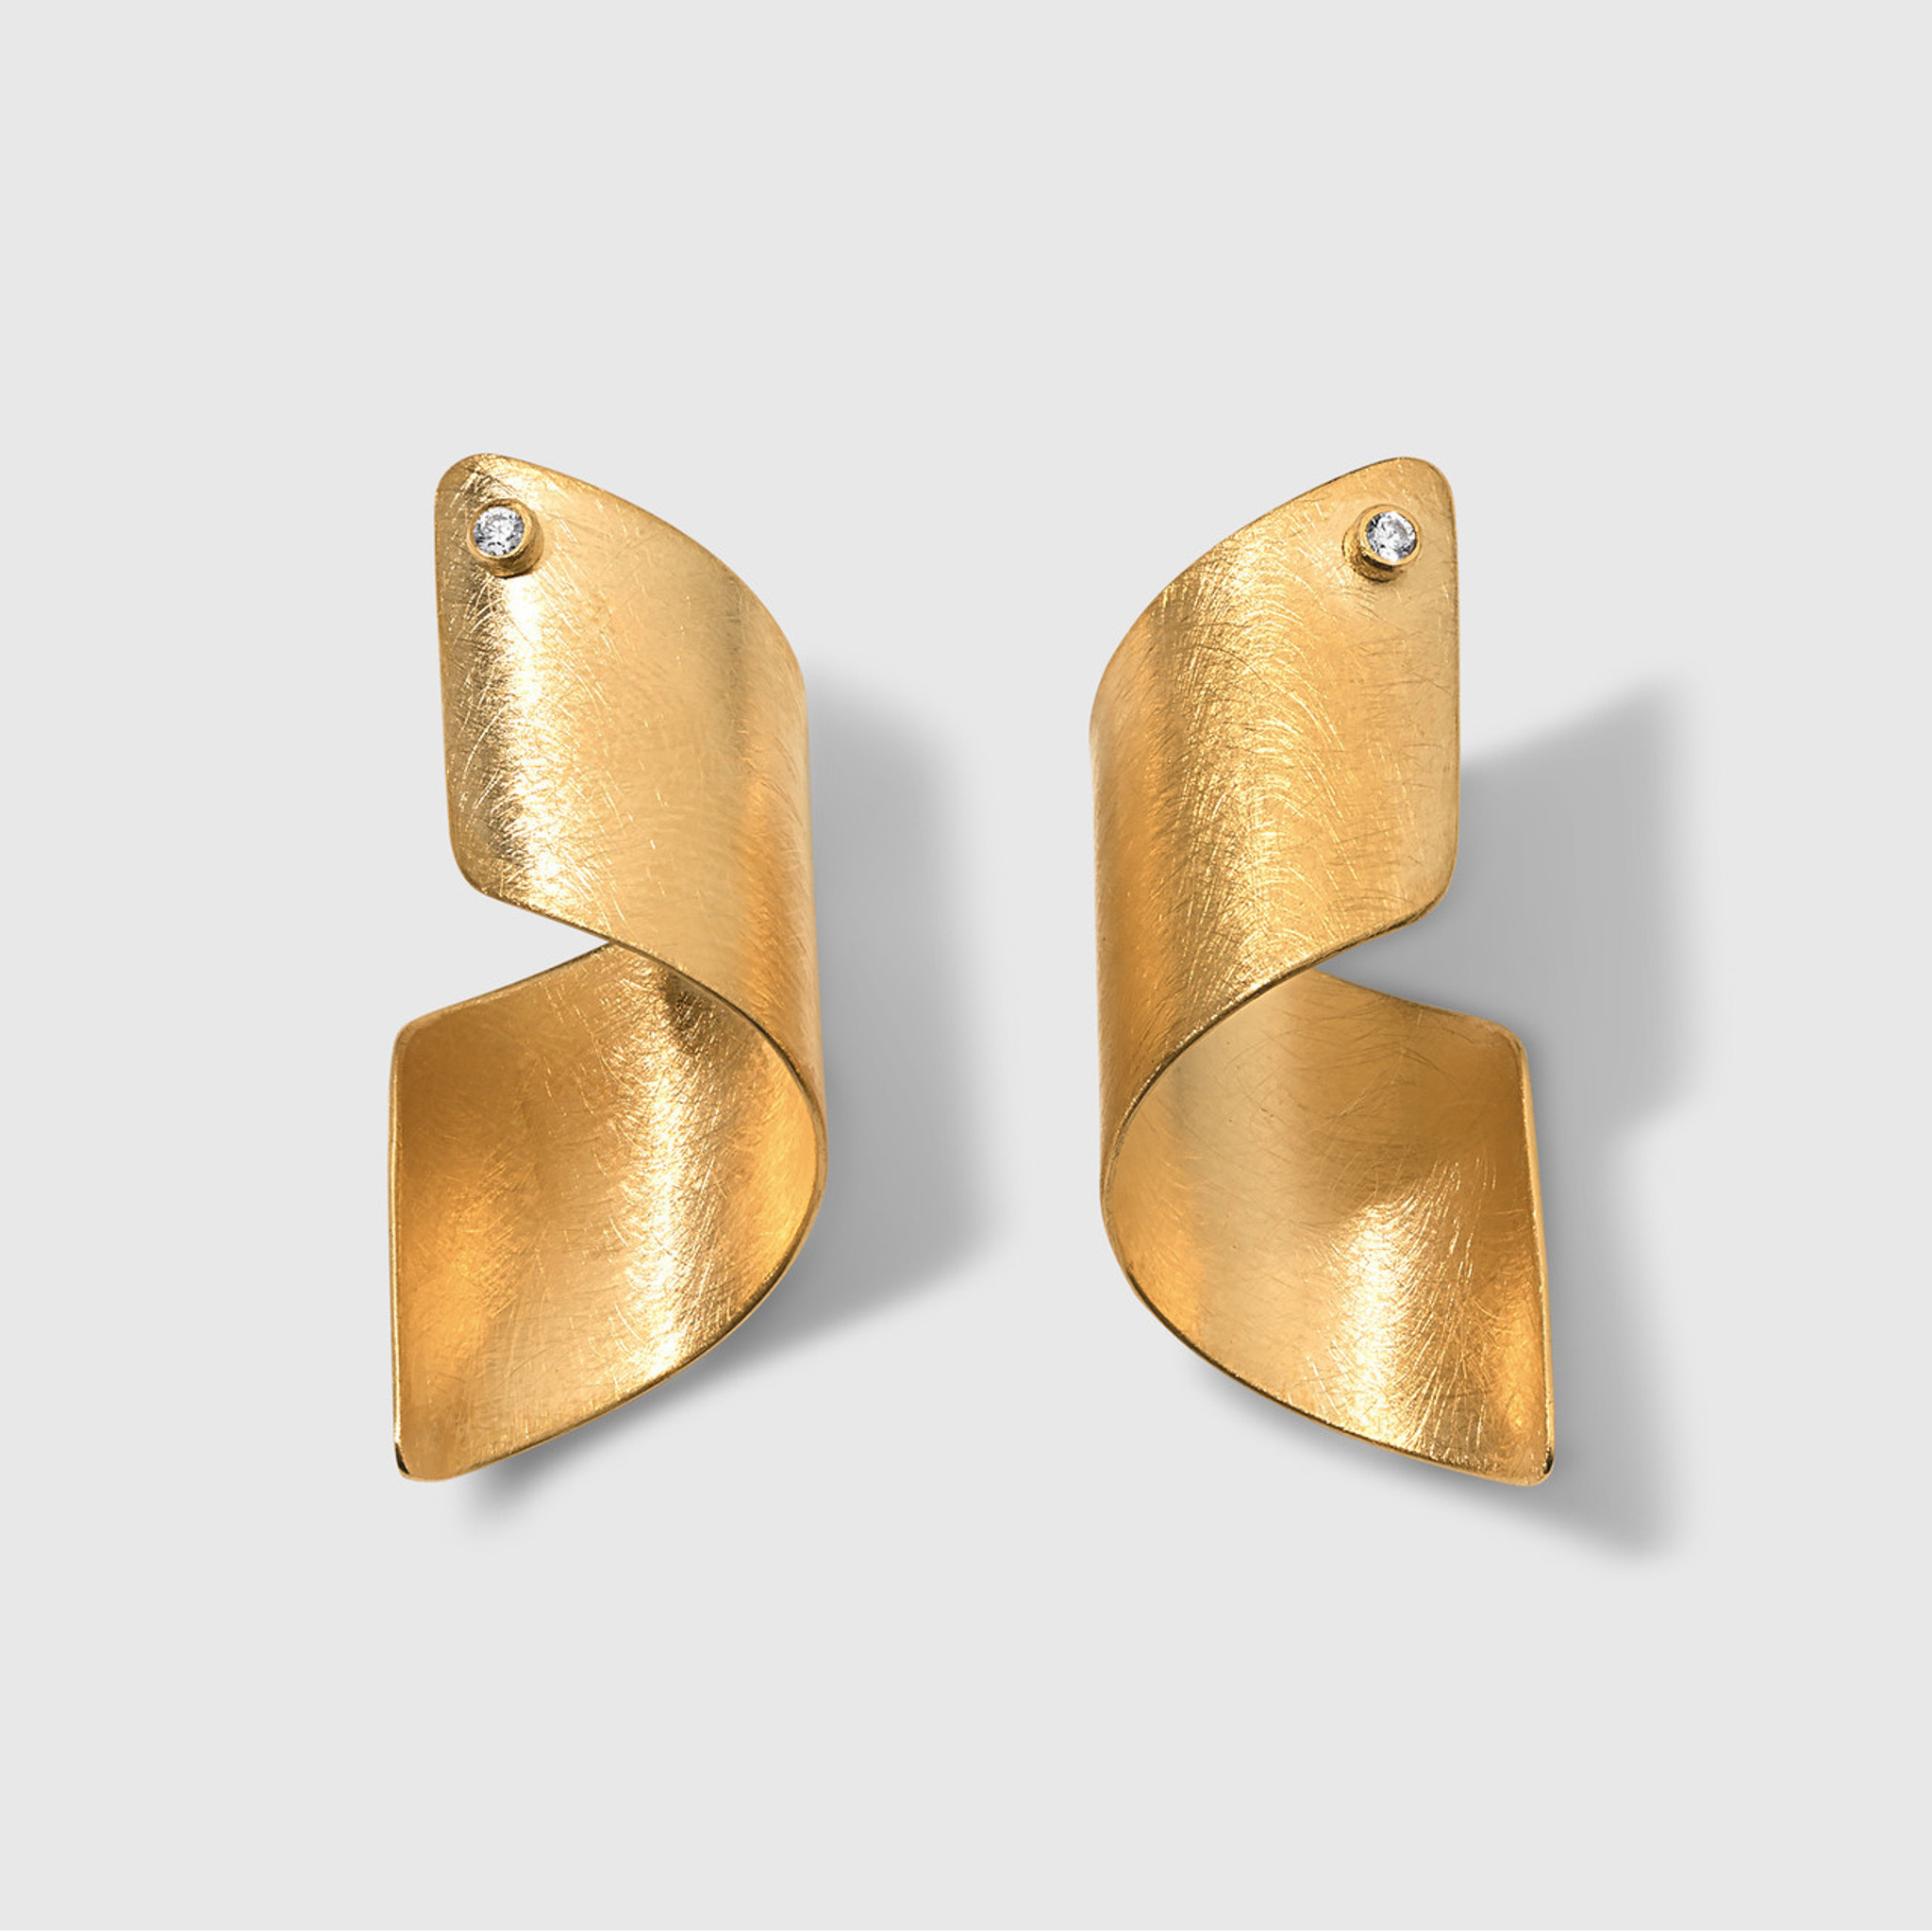 Mysterium Collection Curly Chip Earrings, Gold Plated Stainless Steel 